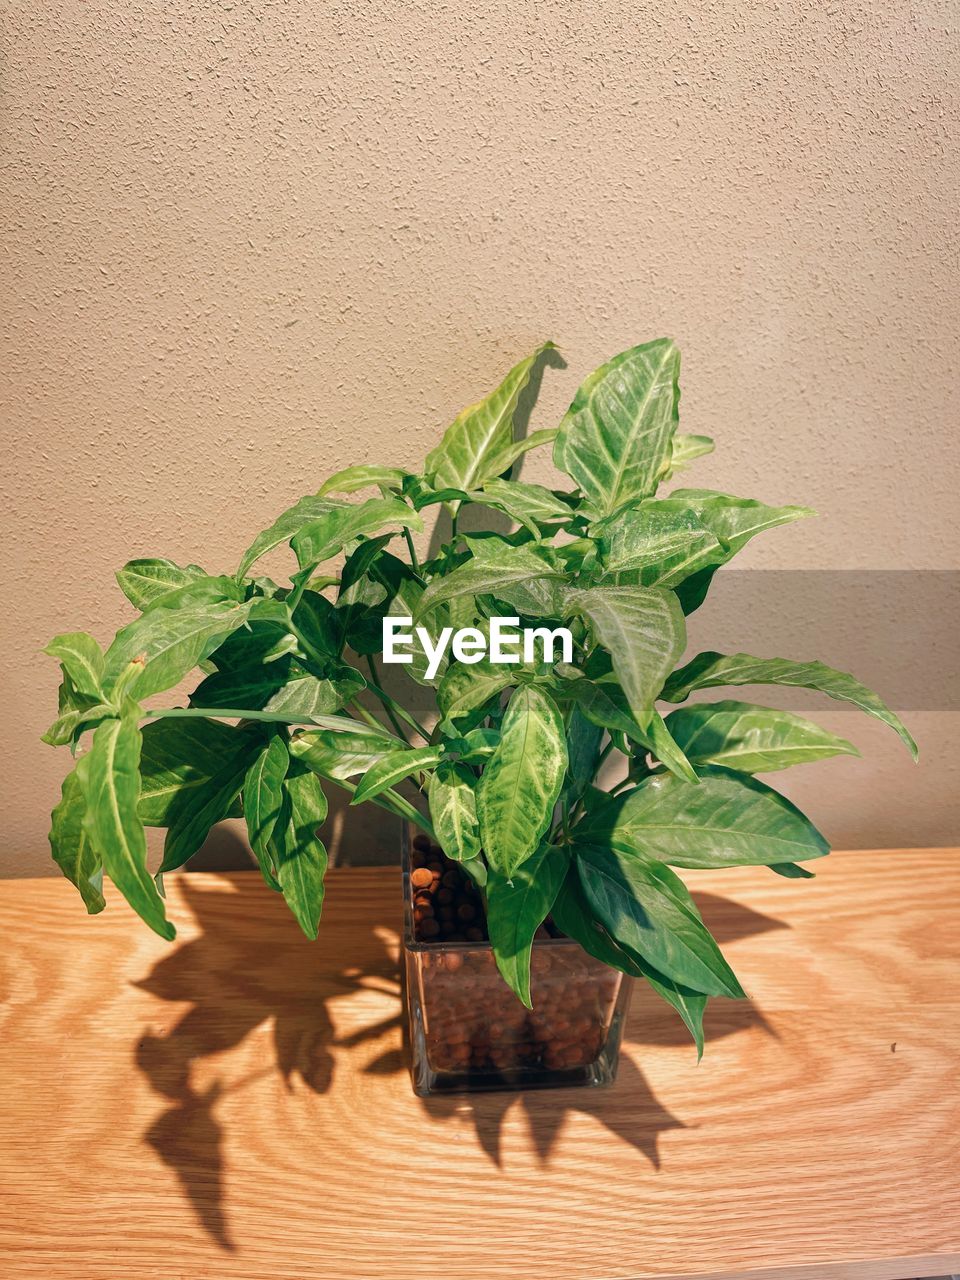 leaf, plant part, green, plant, herb, nature, food and drink, food, no people, growth, wood, indoors, produce, freshness, potted plant, flower, wall - building feature, table, wellbeing, healthy eating, day, houseplant, close-up